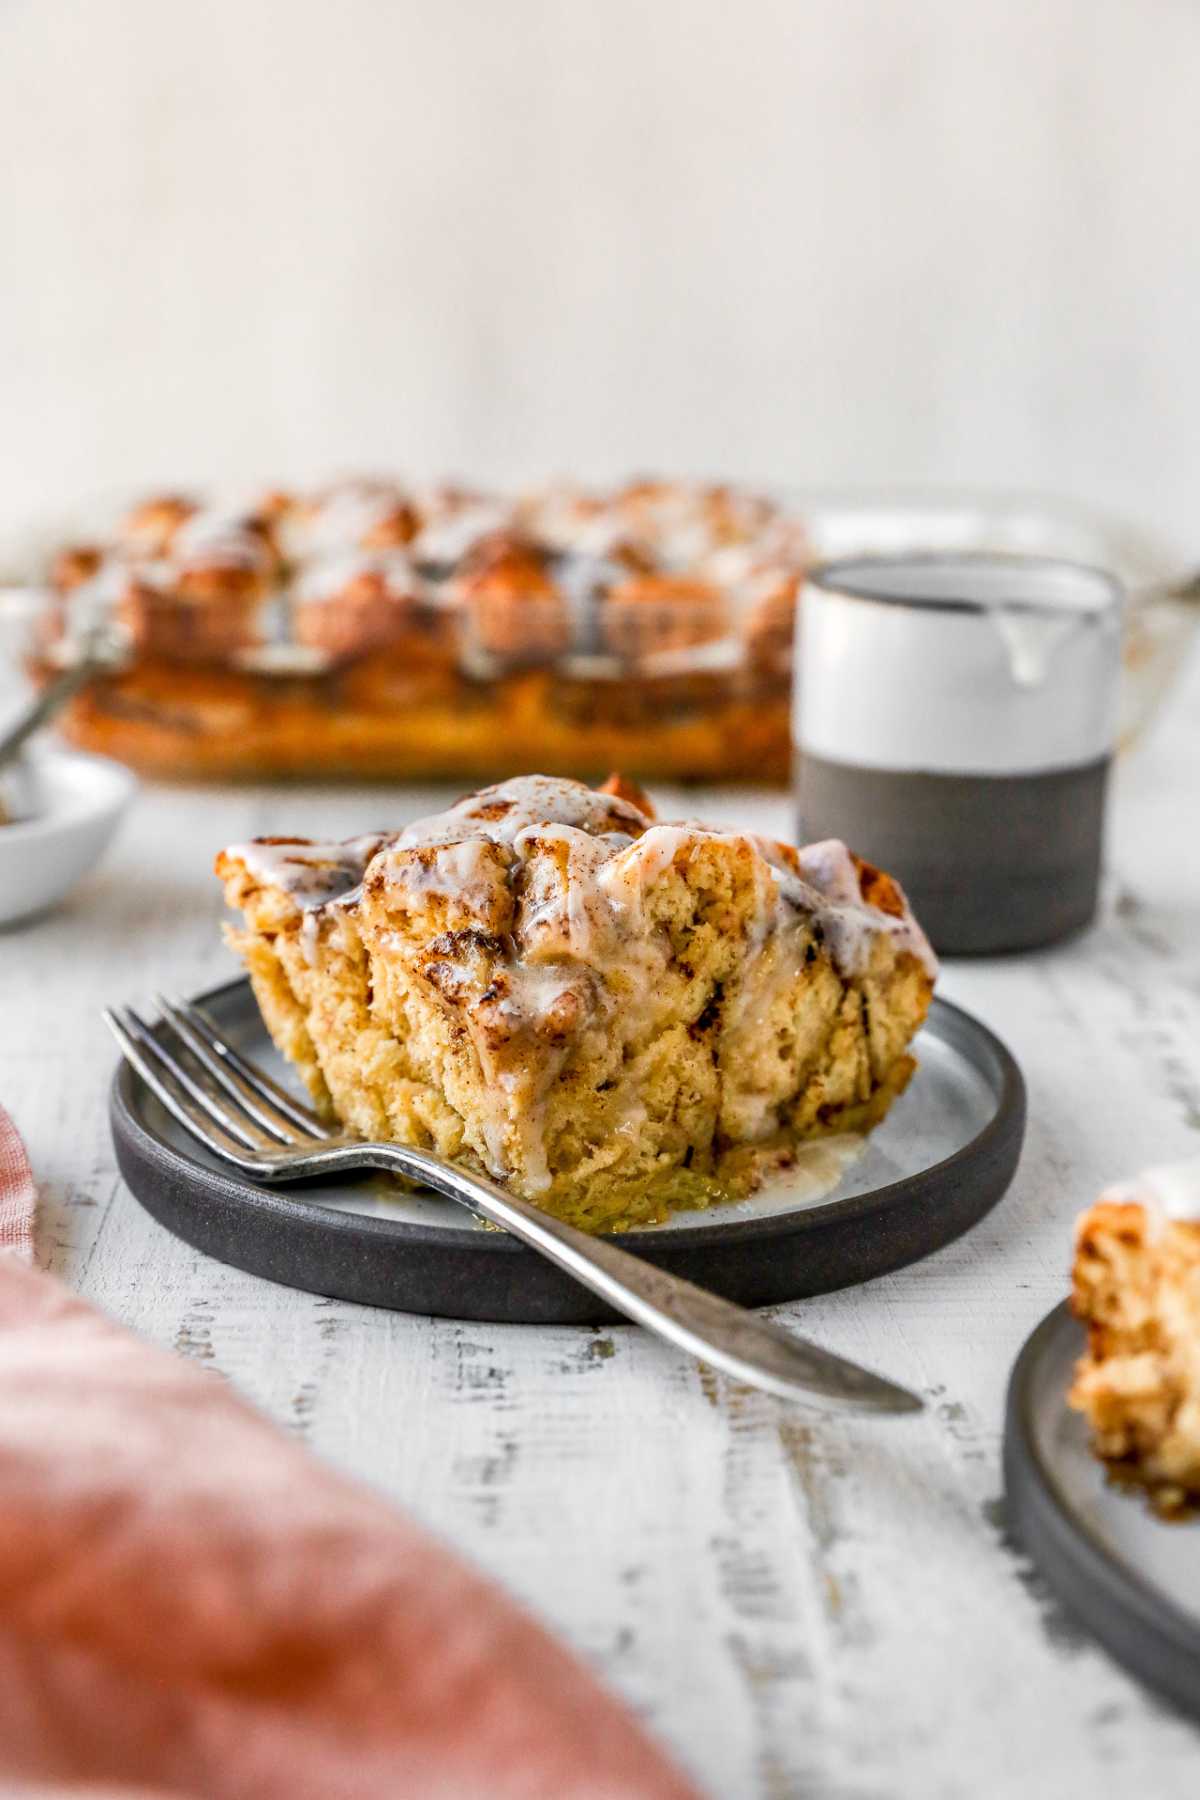 Piece of cinnamon roll casserole on a plate with a fork.